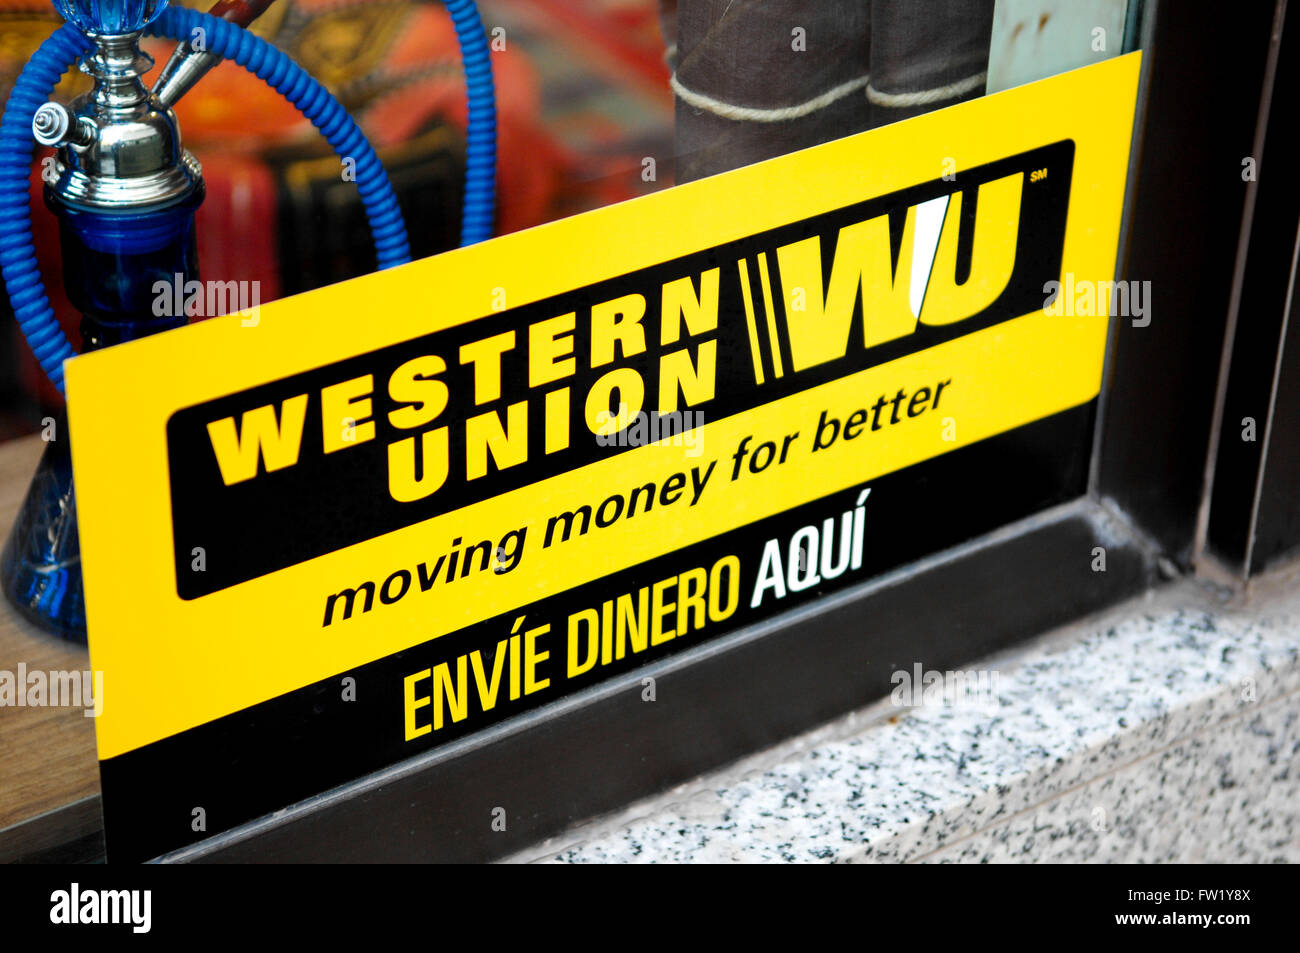 Western Union Sign displayed in shop window of tobacconist in Spain. Stock Photo